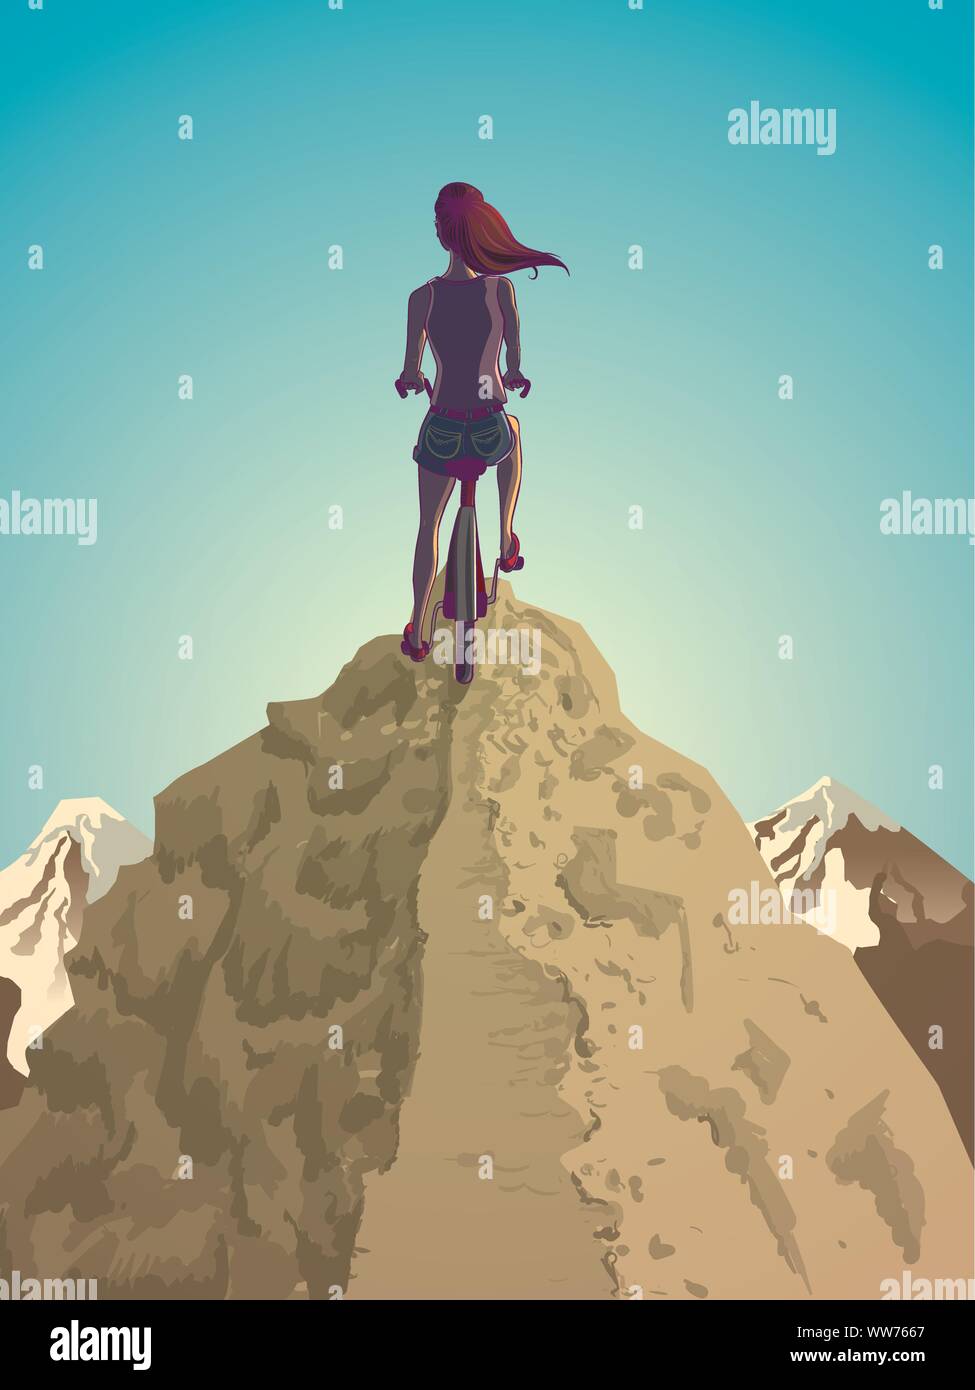 Illustration of a biking girl on the top of a mountain Stock Vector